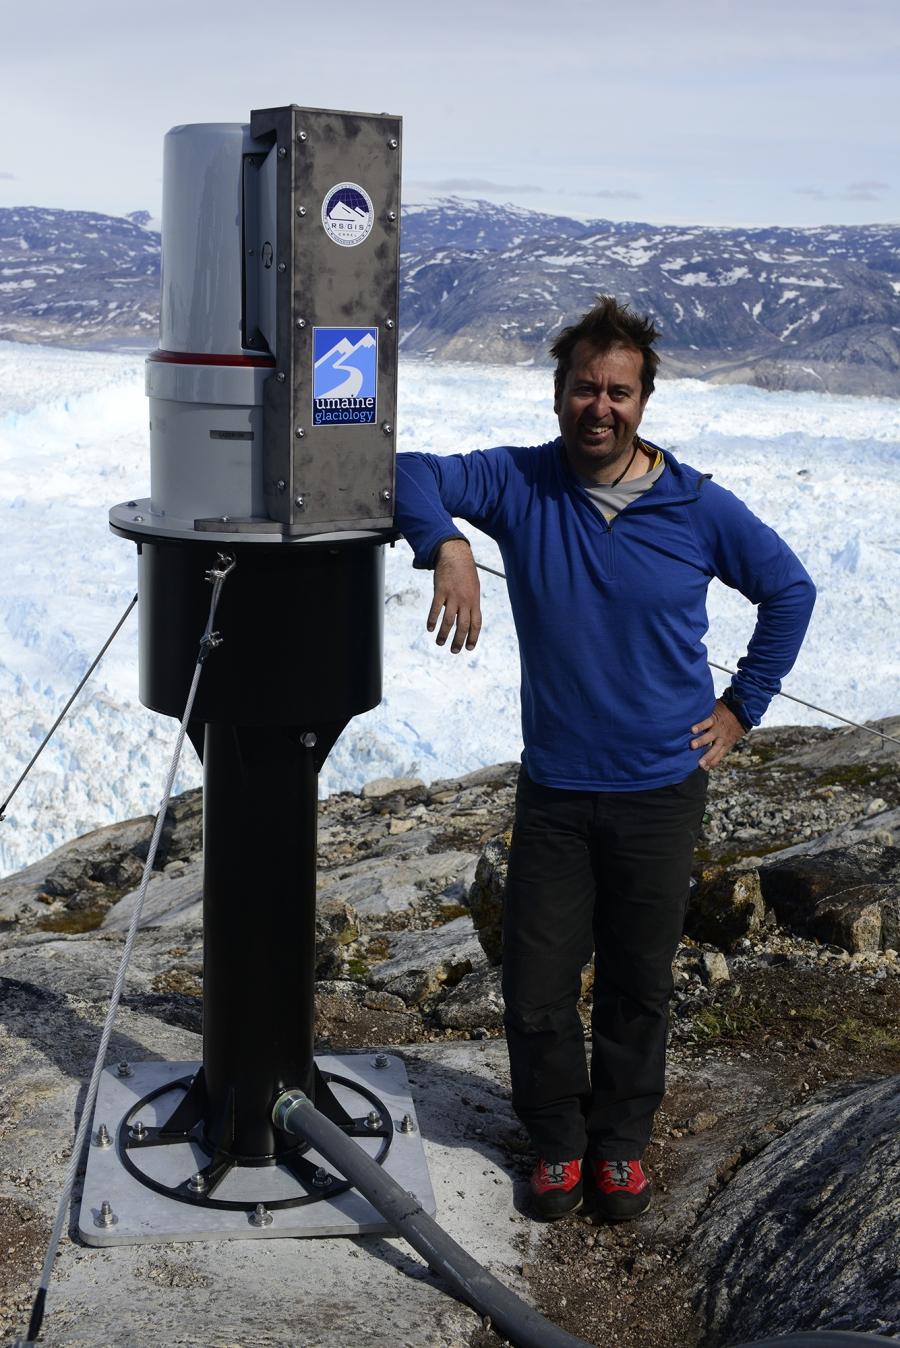 Glaciologist Gordon Hamilton from the University of Maine standing next to a new state-of-the-art laser his team has just installed on the rim of Greenland's Helheim glacier. The laser will scan the glacier in unprecedented detail and provide valuable clu